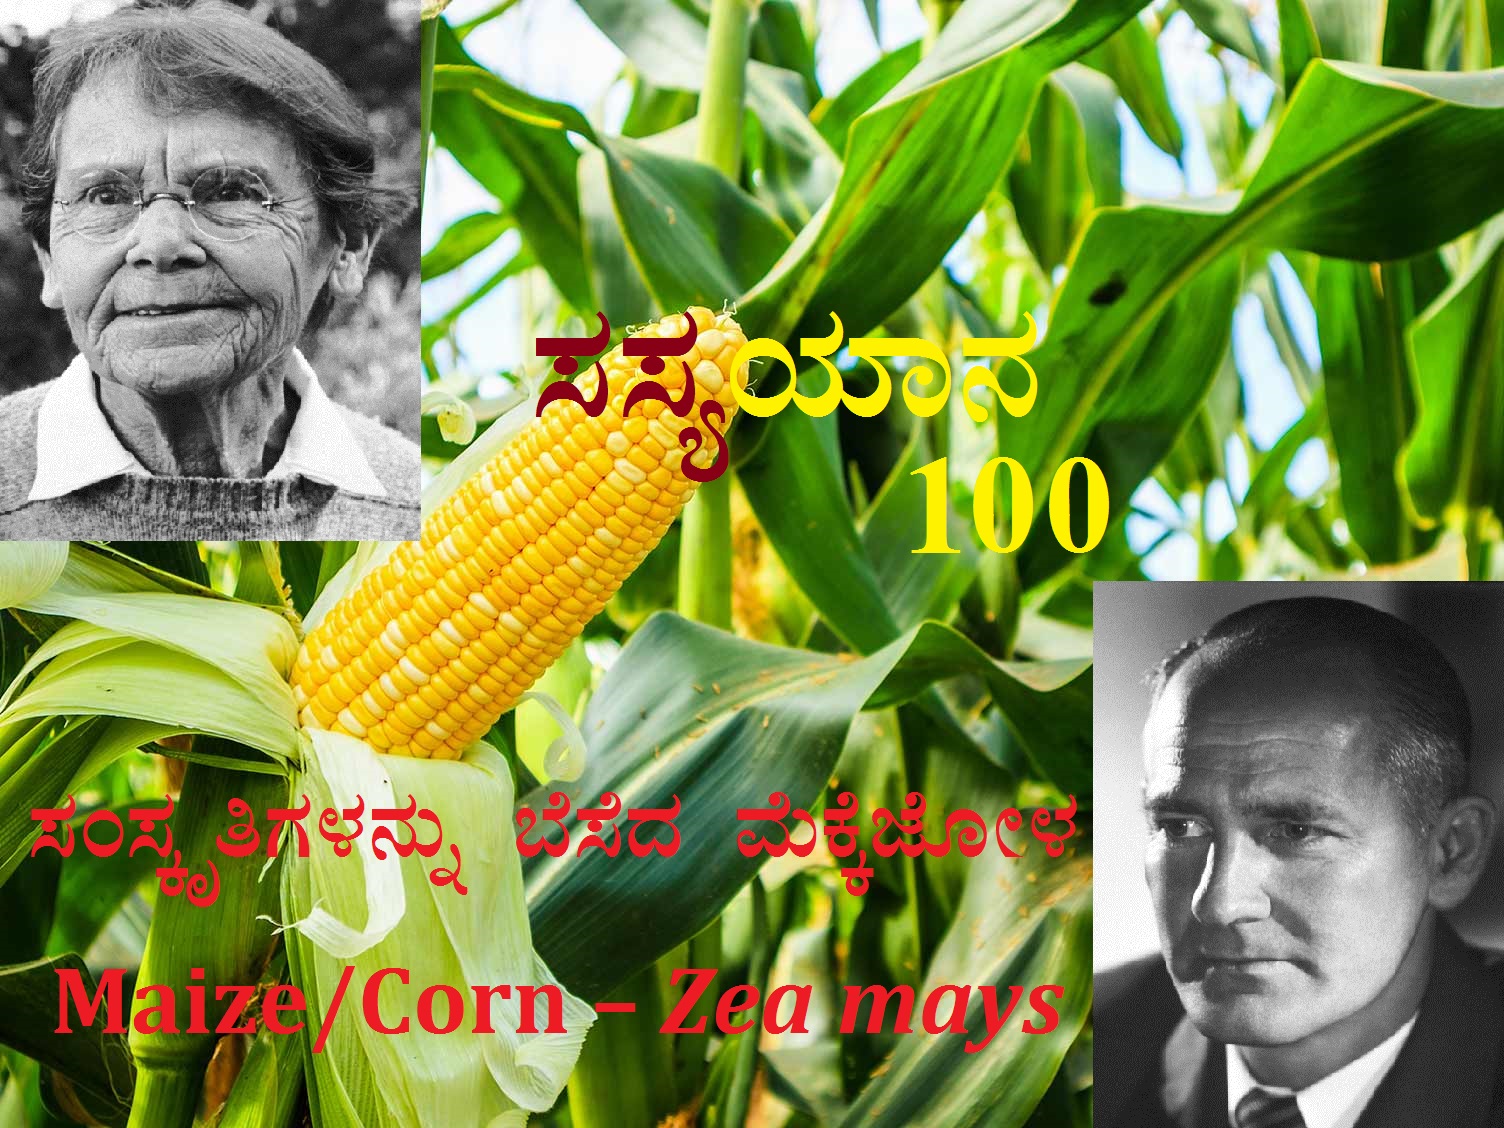 Read more about the article ಸಂಸ್ಕೃತಿಗಳನ್ನು ಬೆಸೆದ ಮೆಕ್ಕೆಜೋಳ : Maize/Corn – Zea mays